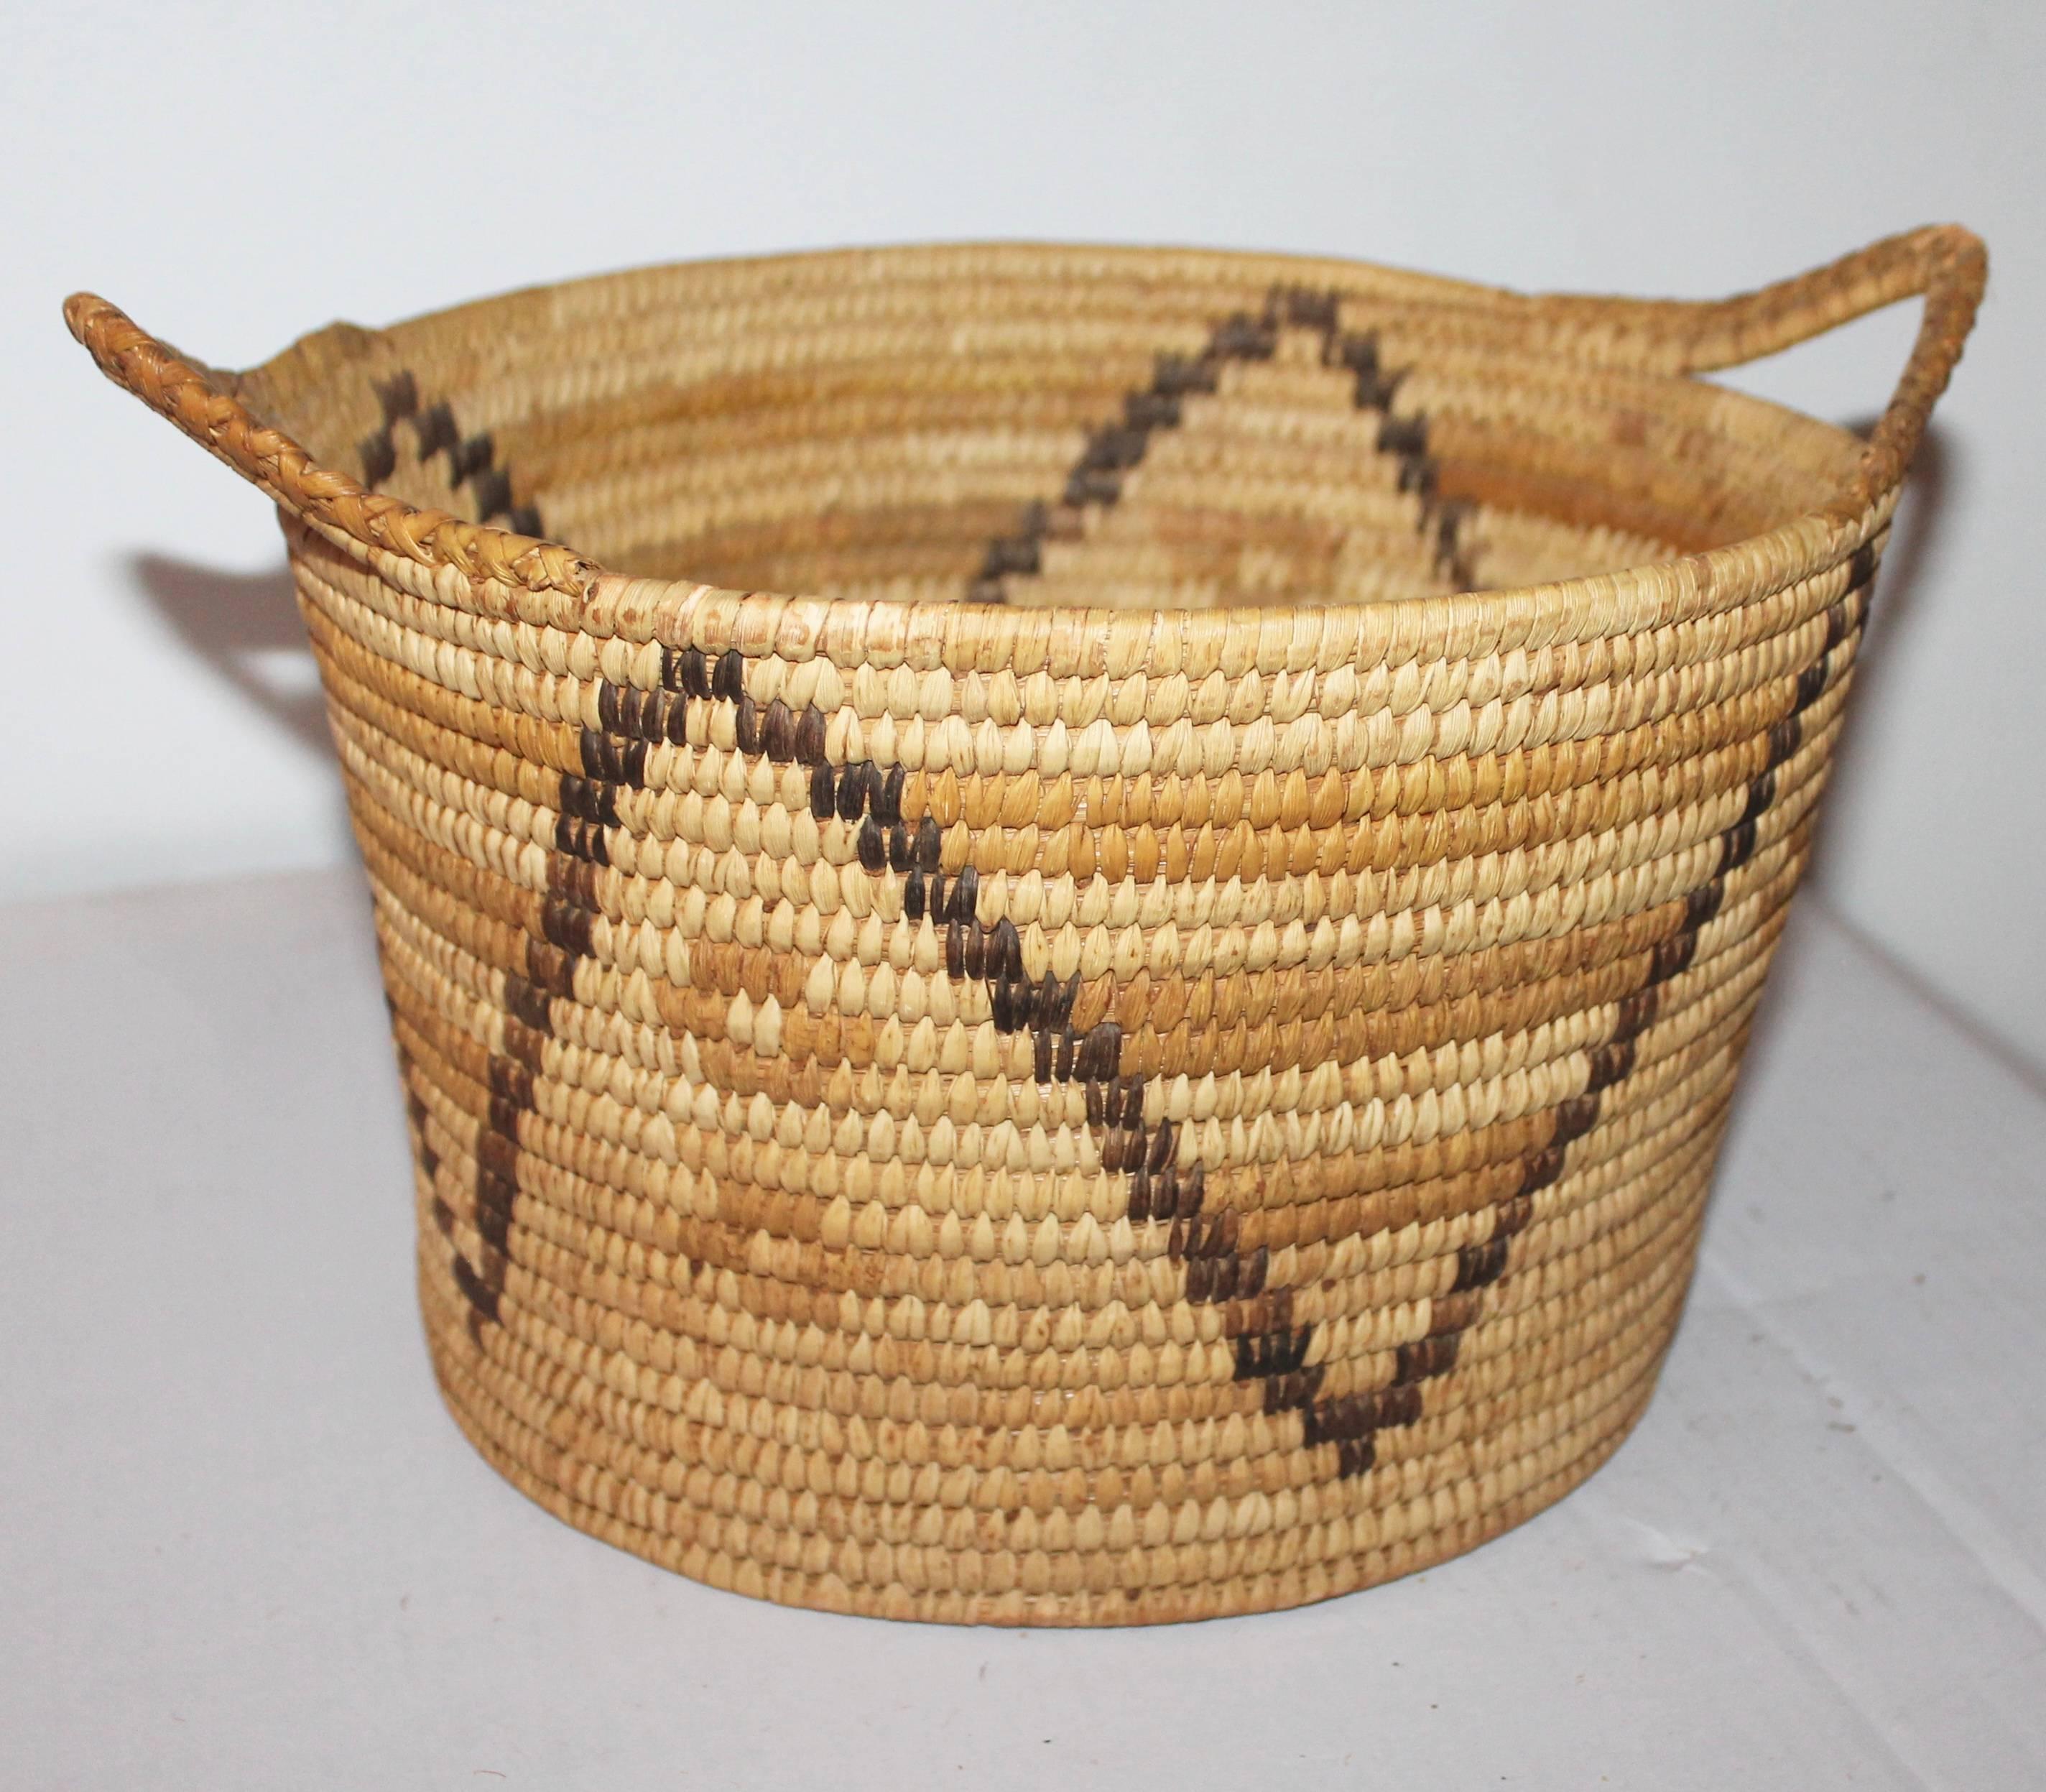 This fine and unusual double handled Papago basket is in good condition. Its simple pattern and fine tight weave makes it very special and unusual.